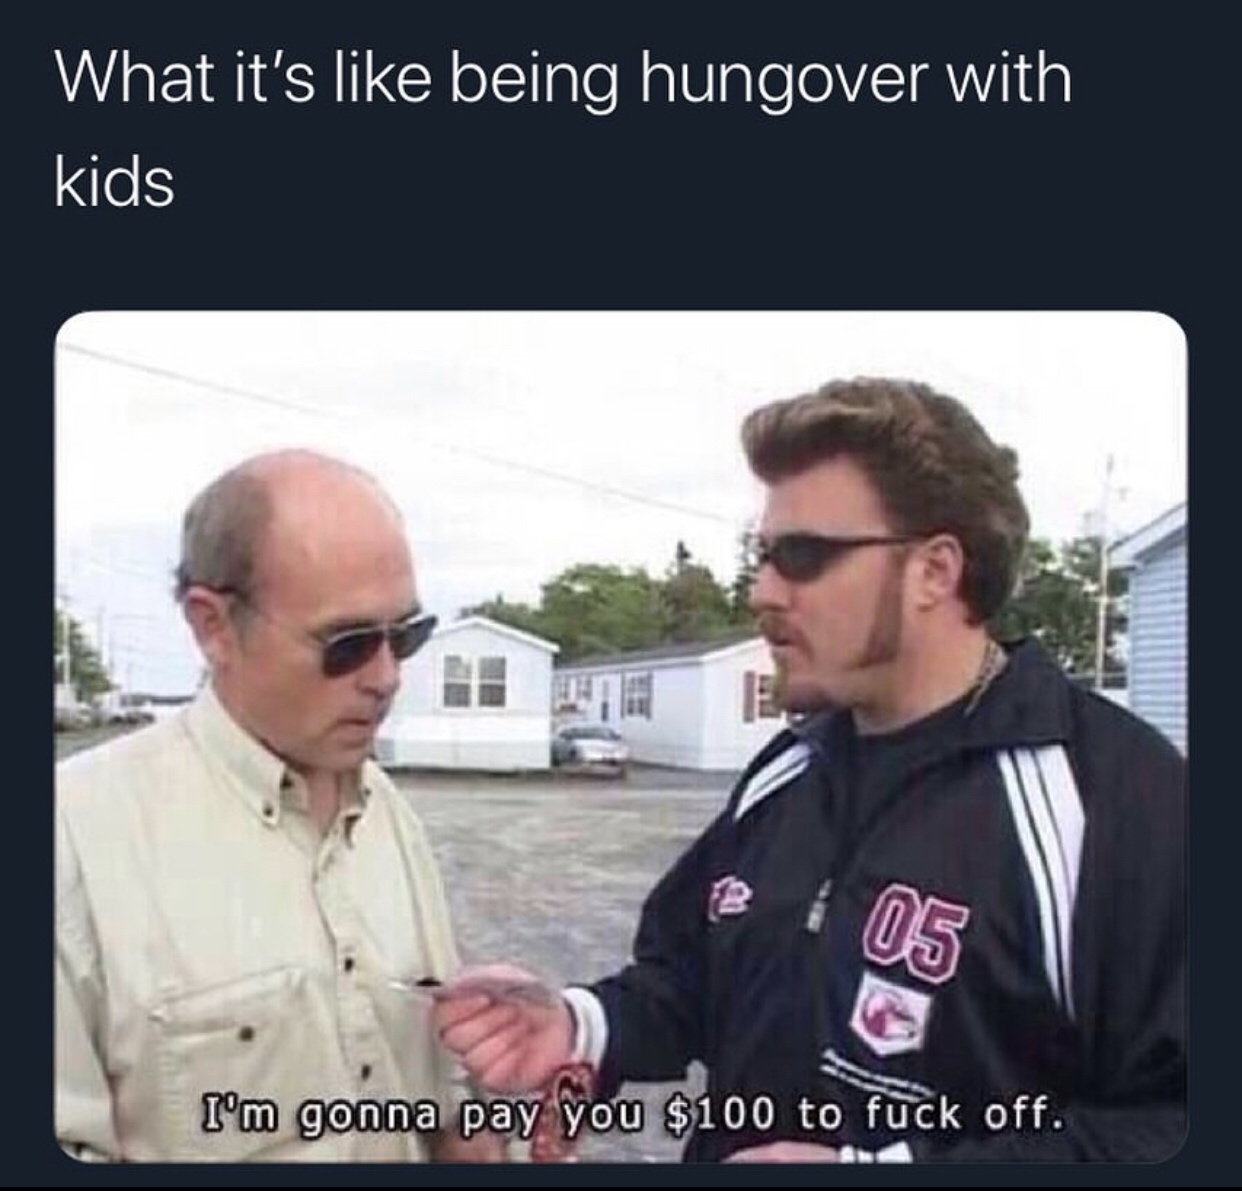 ill give you 100 to fuck off - What it's being hungover with kids I'm gonna pay you $100 to fuck off.